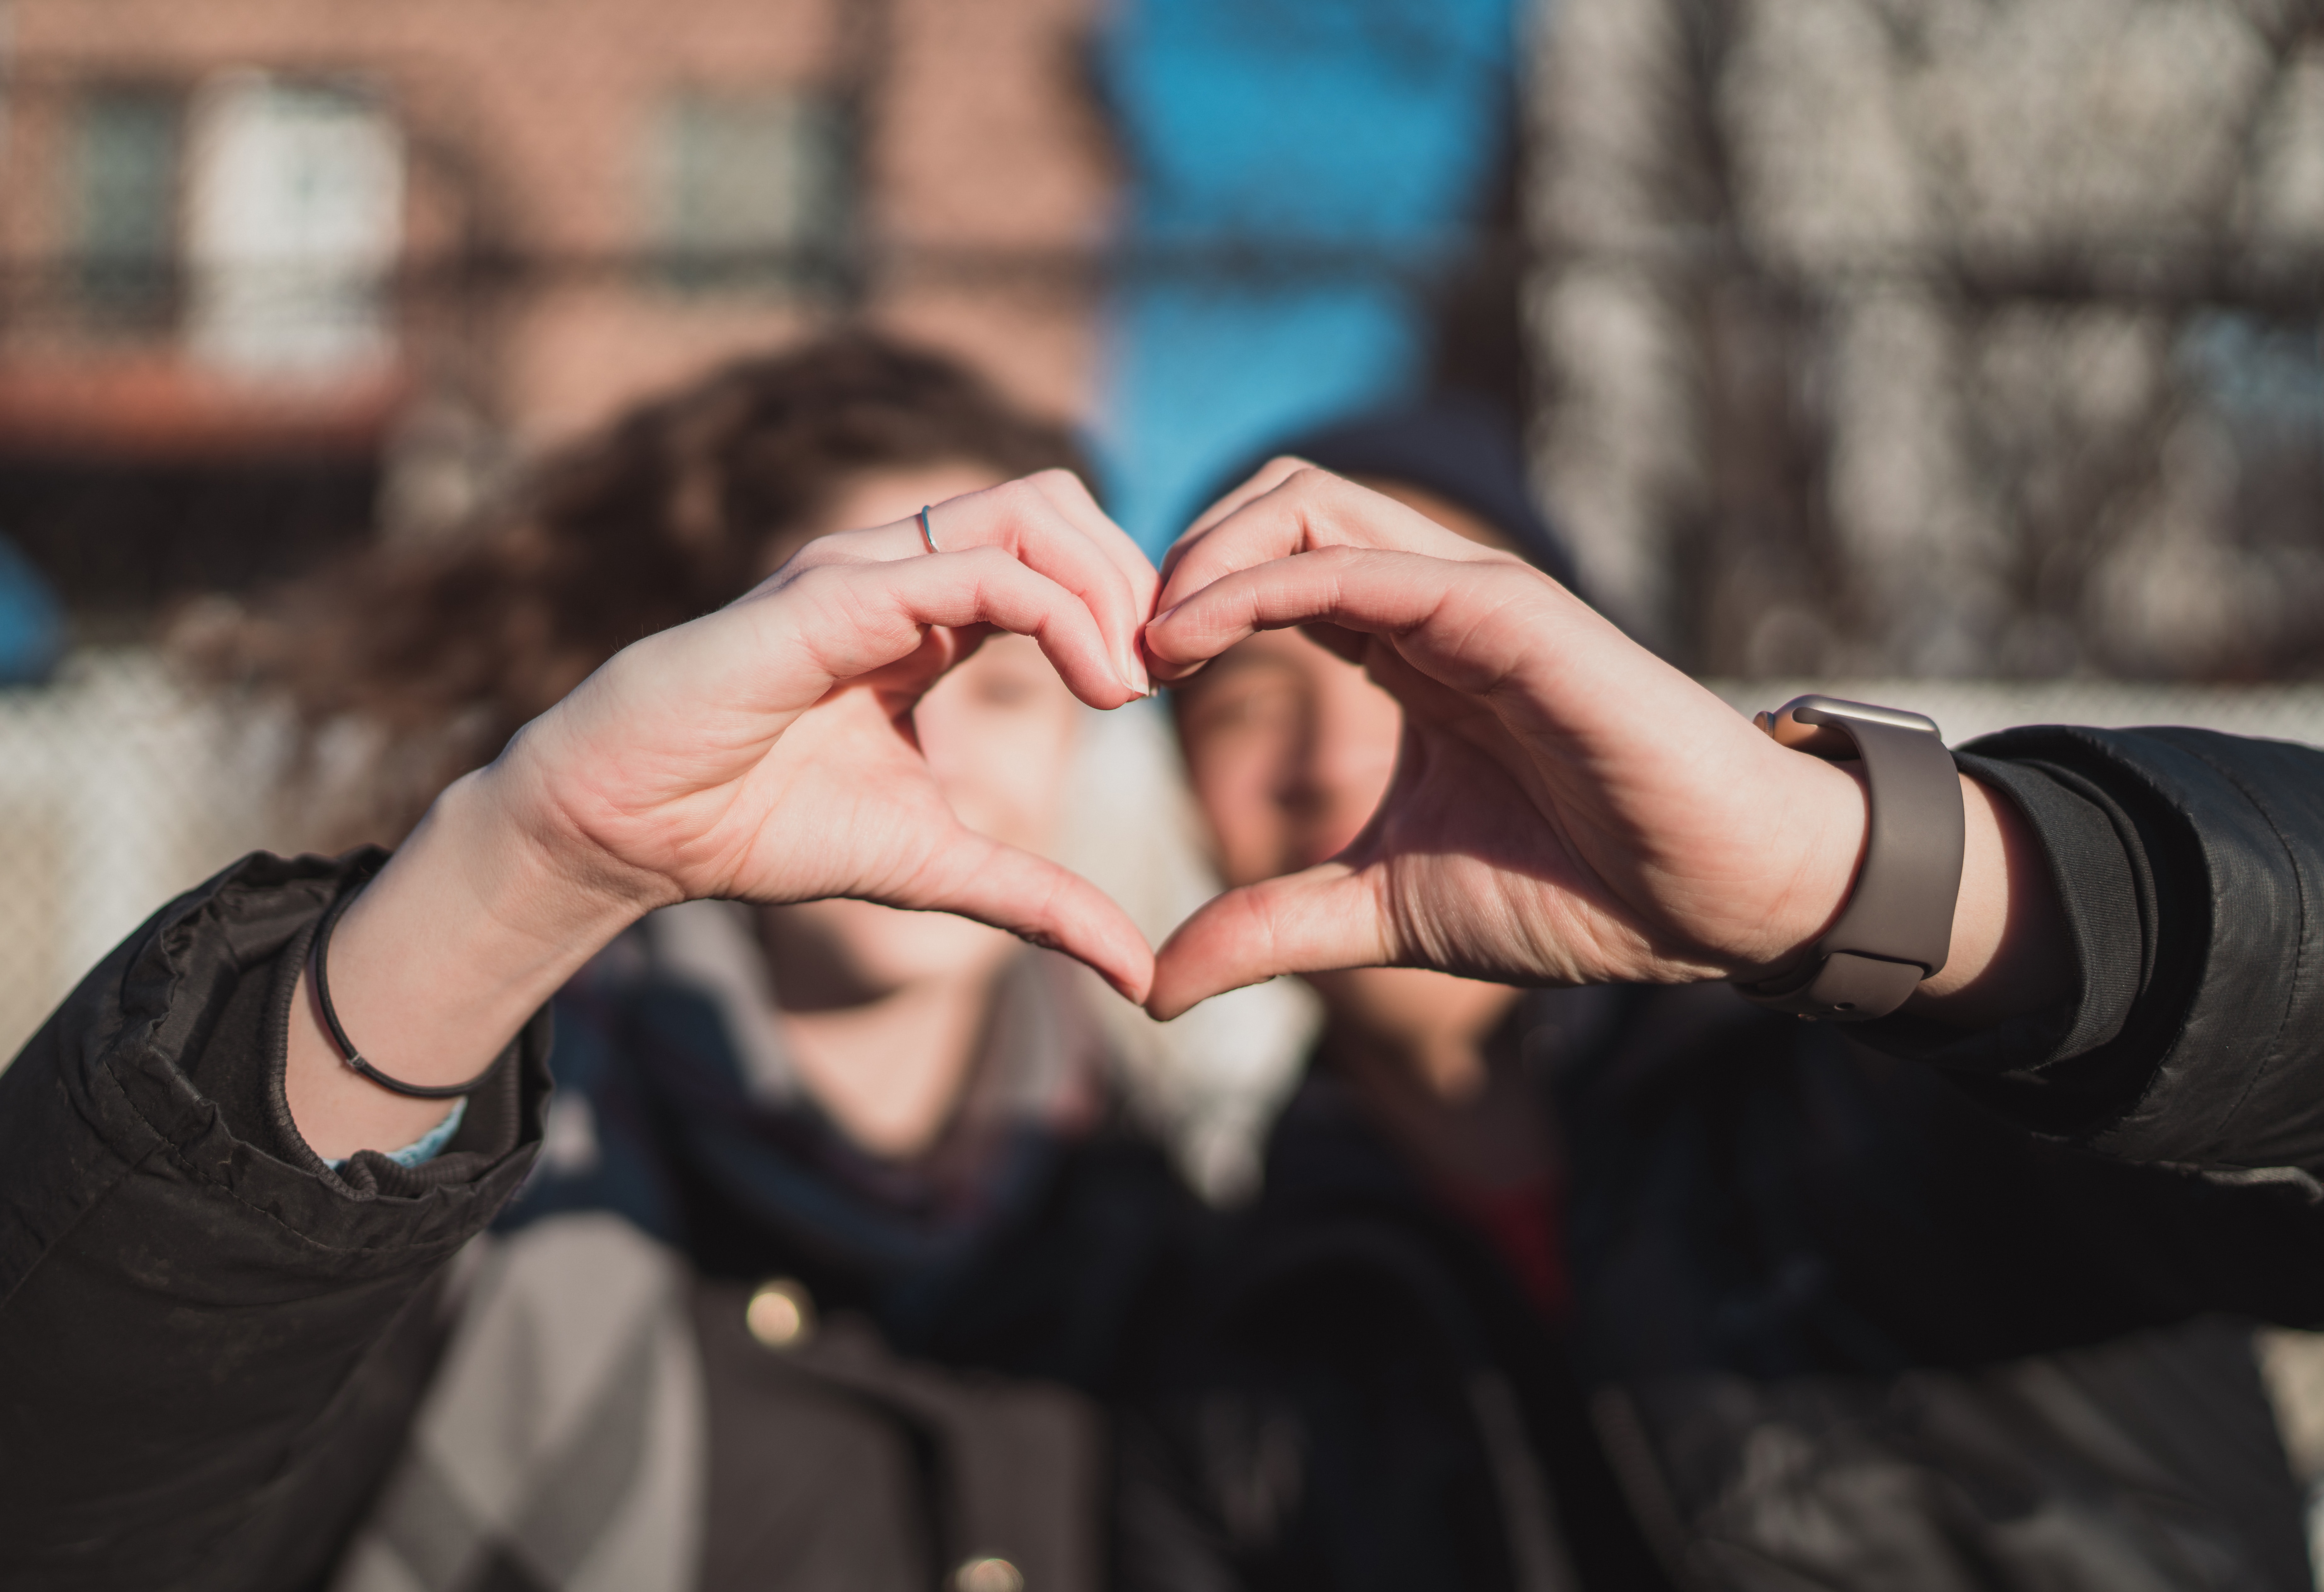 Couple forming heart with their hands | Source: Unsplash